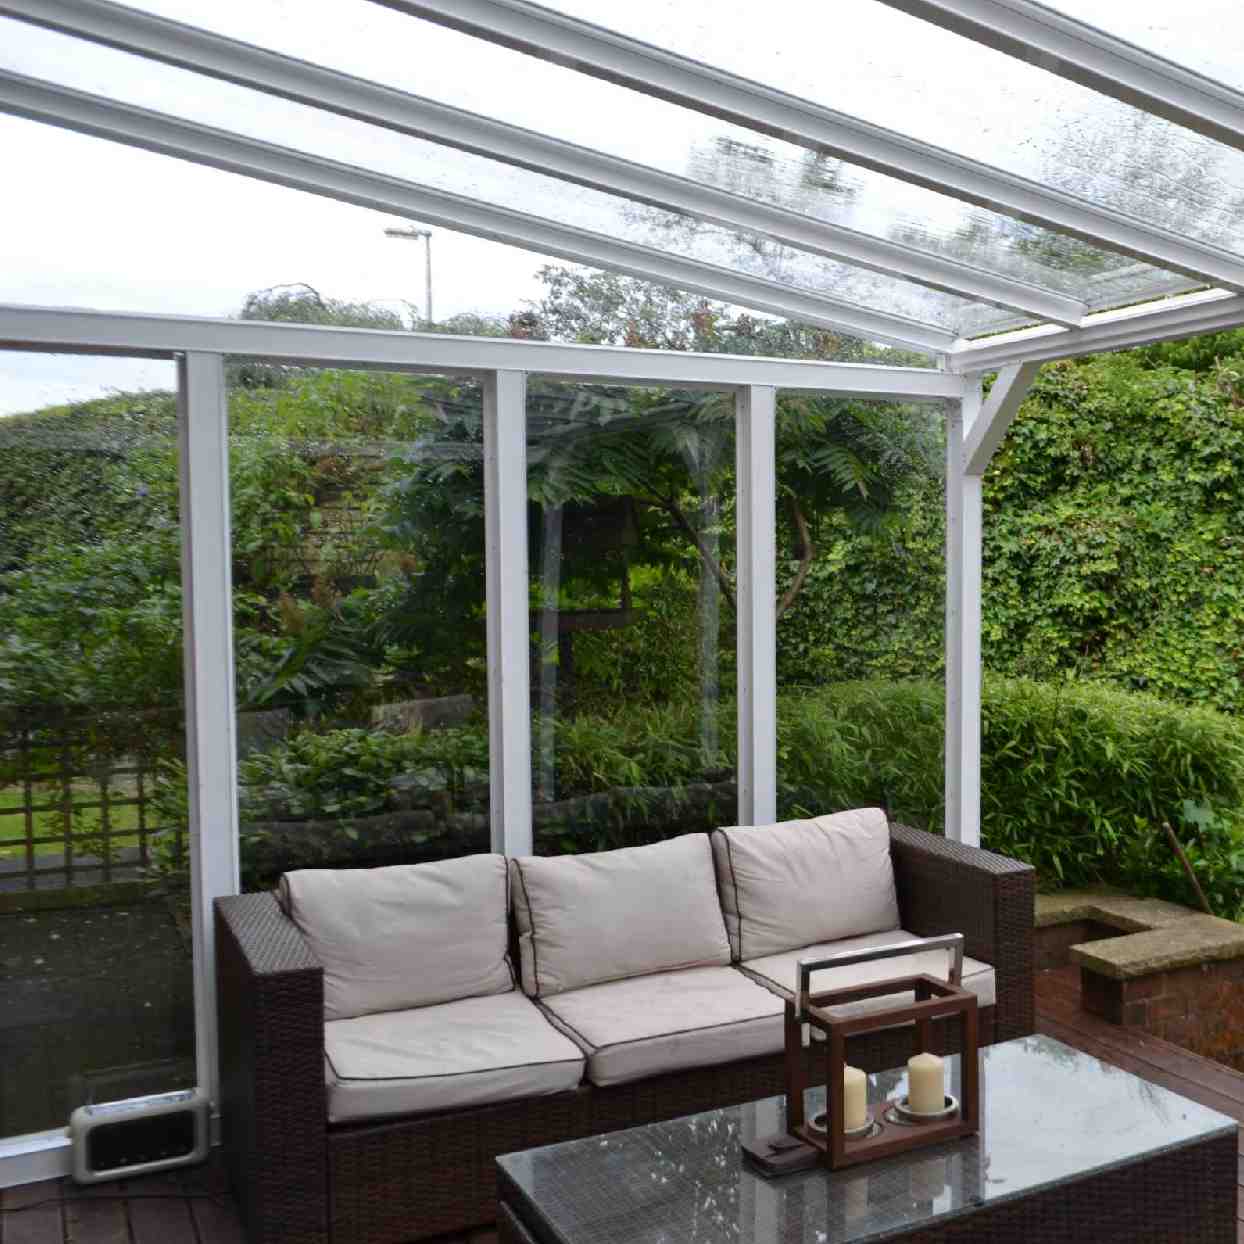 Buy Omega Verandah White with 16mm Polycarbonate Glazing - 6.3m (W) x 3.5m (P), (4) Supporting Posts online today